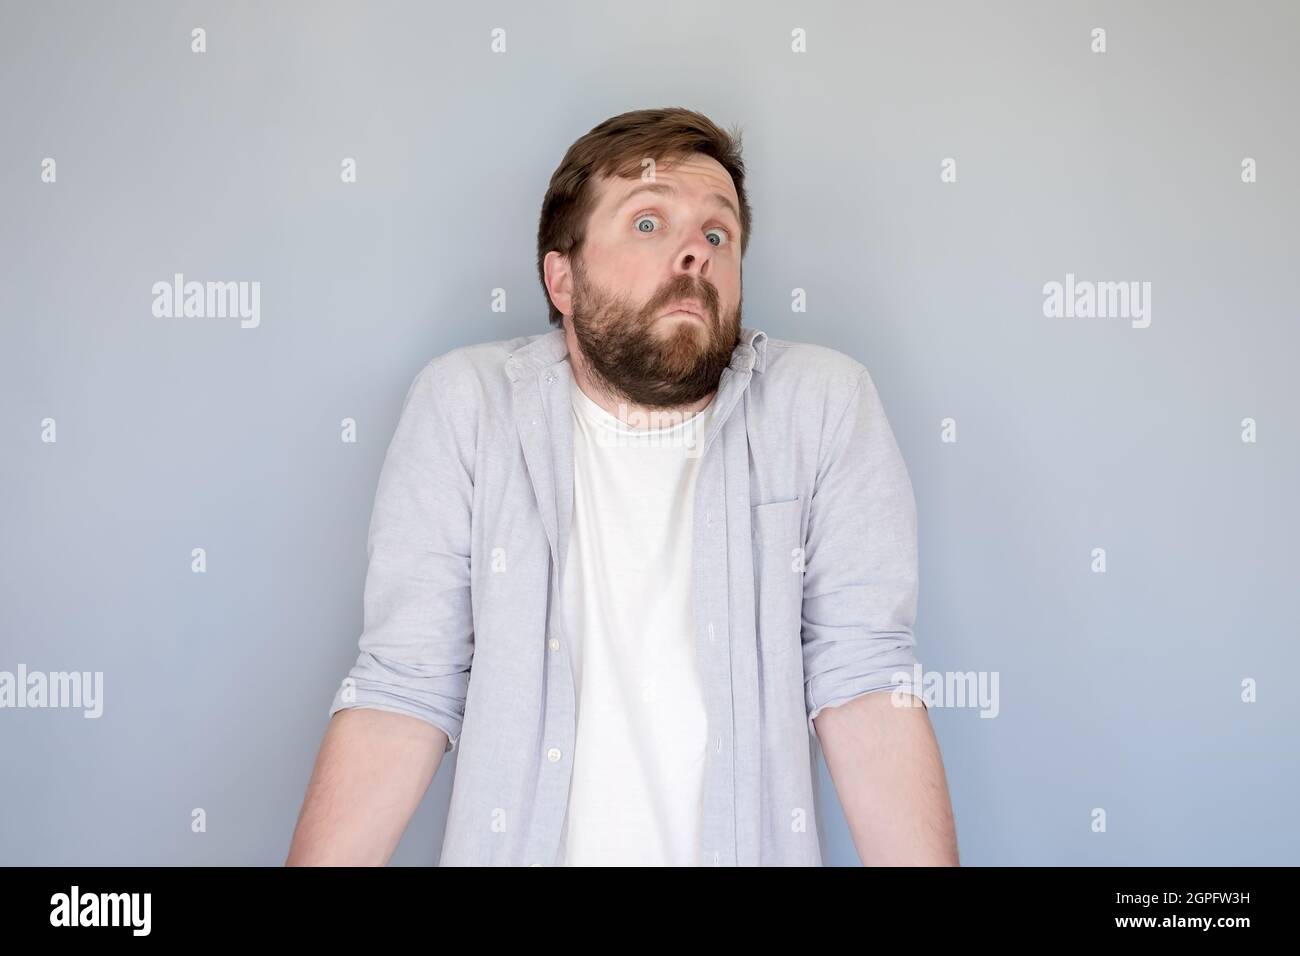 Bewilderment bearded man in a shirt shrugs in surprise and looks at the camera with a strange and funny expression on face.  Stock Photo